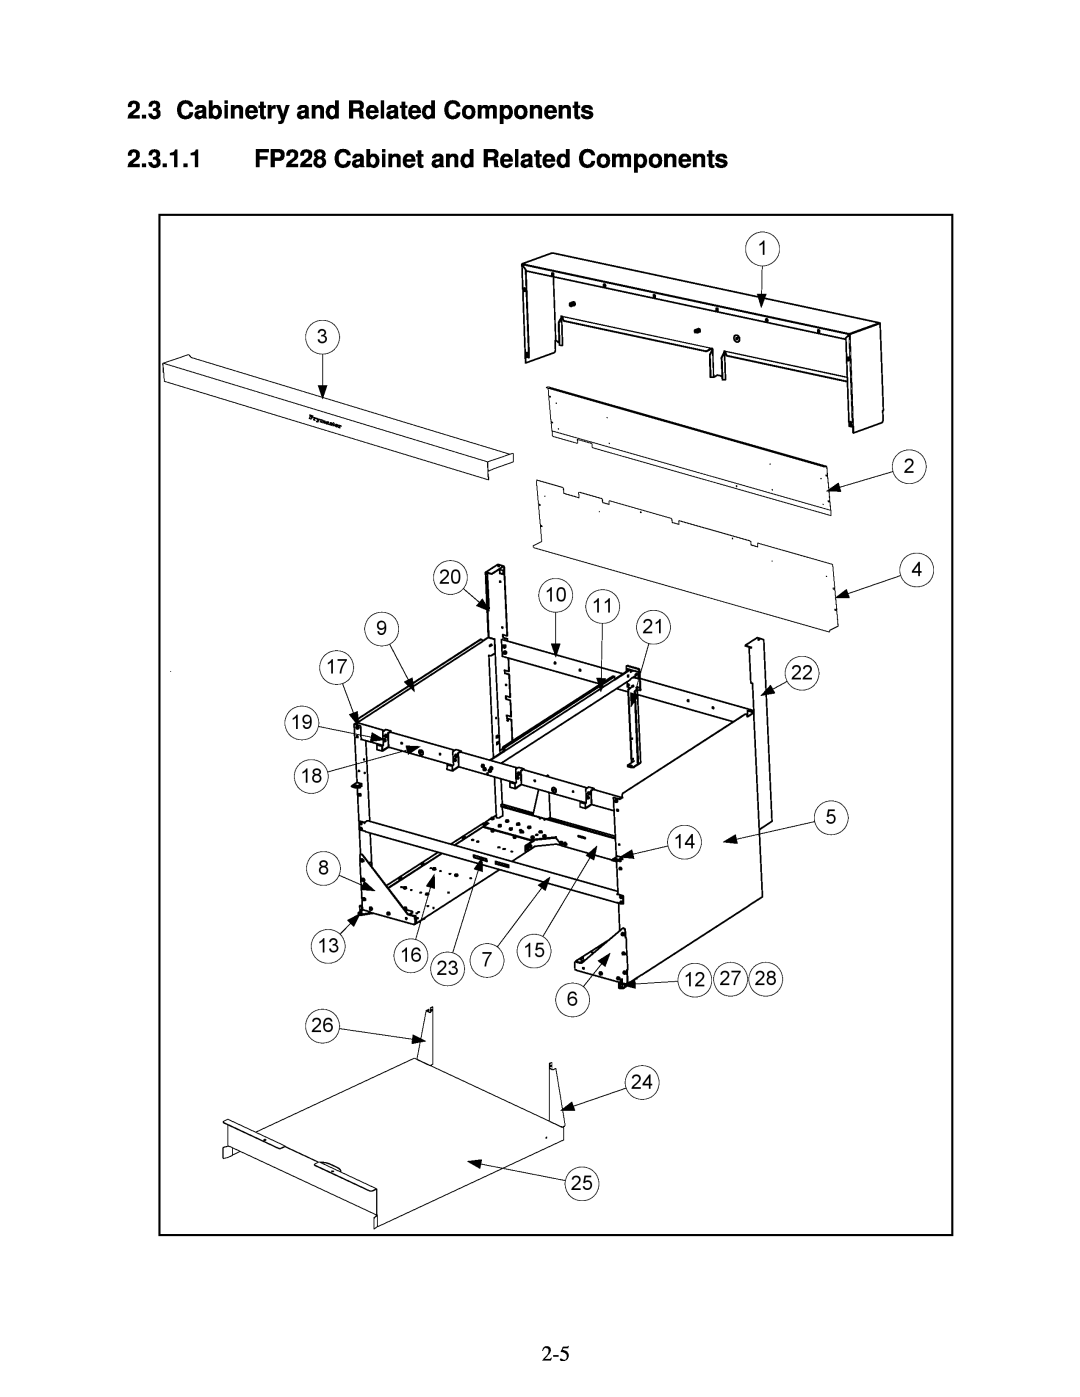 Frymaster 2836 manual Cabinetry and Related Components, 2.3.1.1 FP228 Cabinet and Related Components 